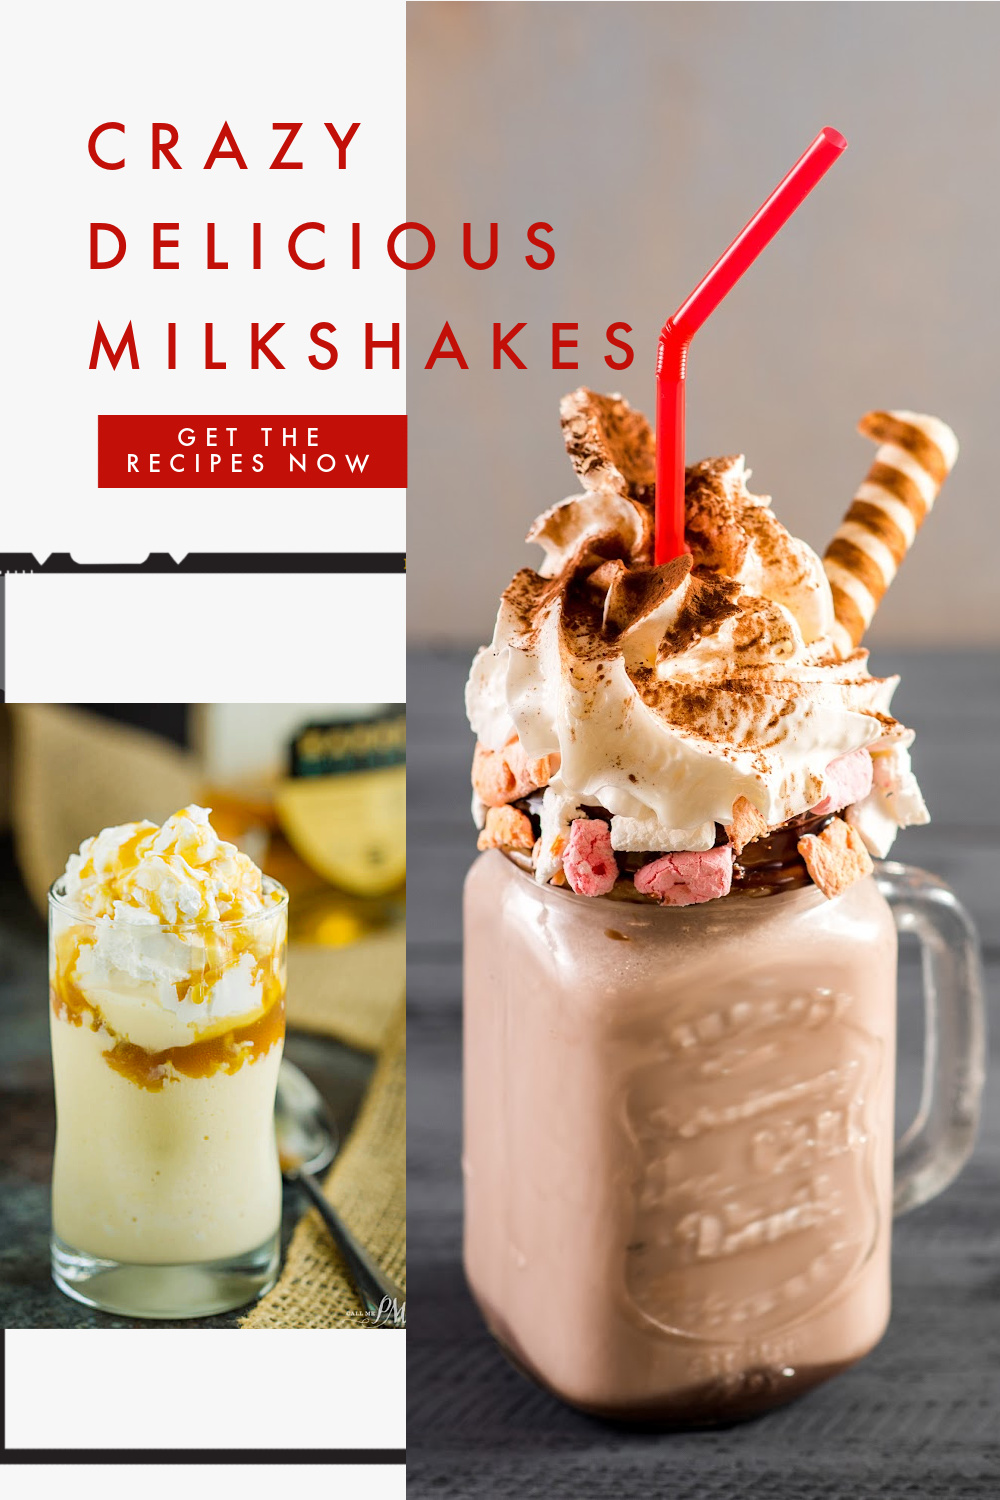 Amazing Milkshake Whether you like a simple vanilla or chocolate or you crave more complex flavors, there is a milkshake recipe for you